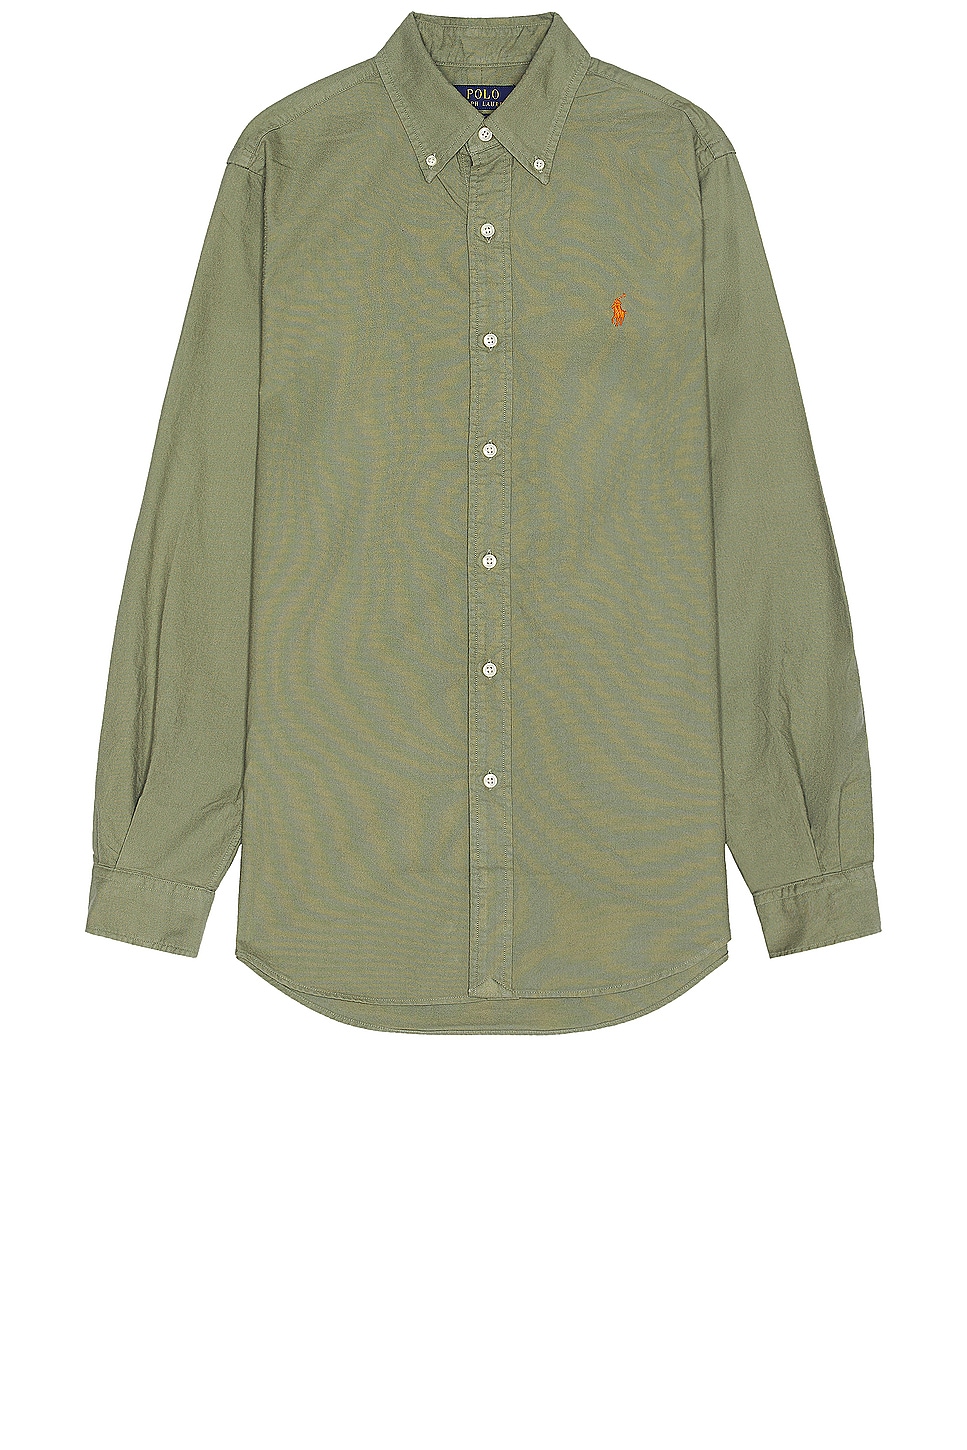 Image 1 of Polo Ralph Lauren Long Sleeve Oxford Classic Shirt in Sage Green